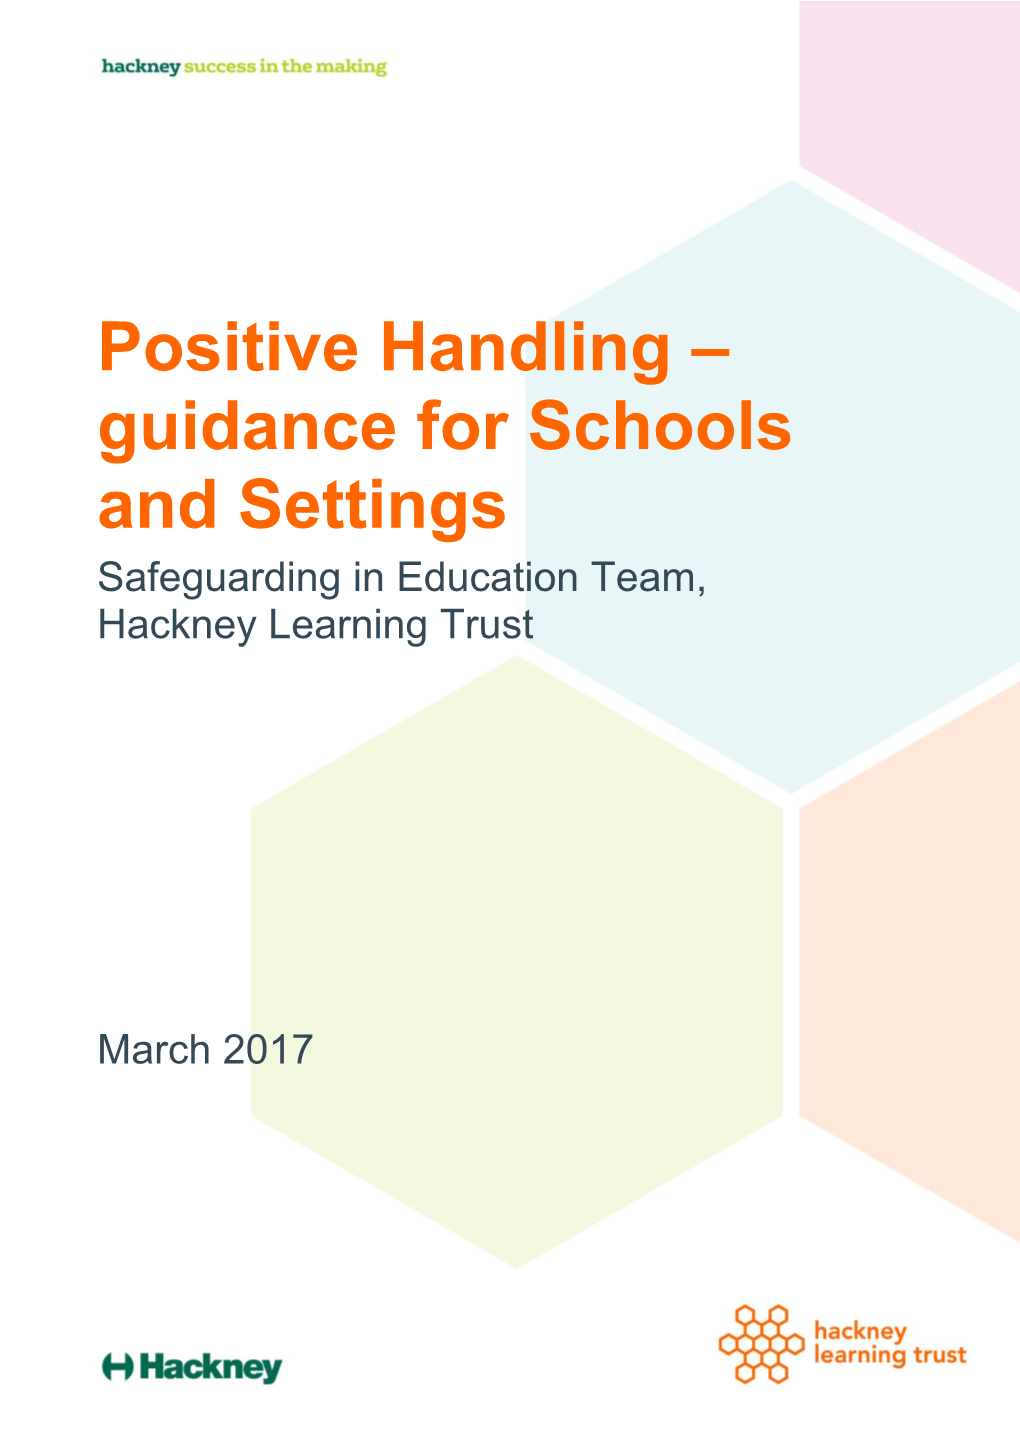 Positive Handling – Guidance for Schools and Settings